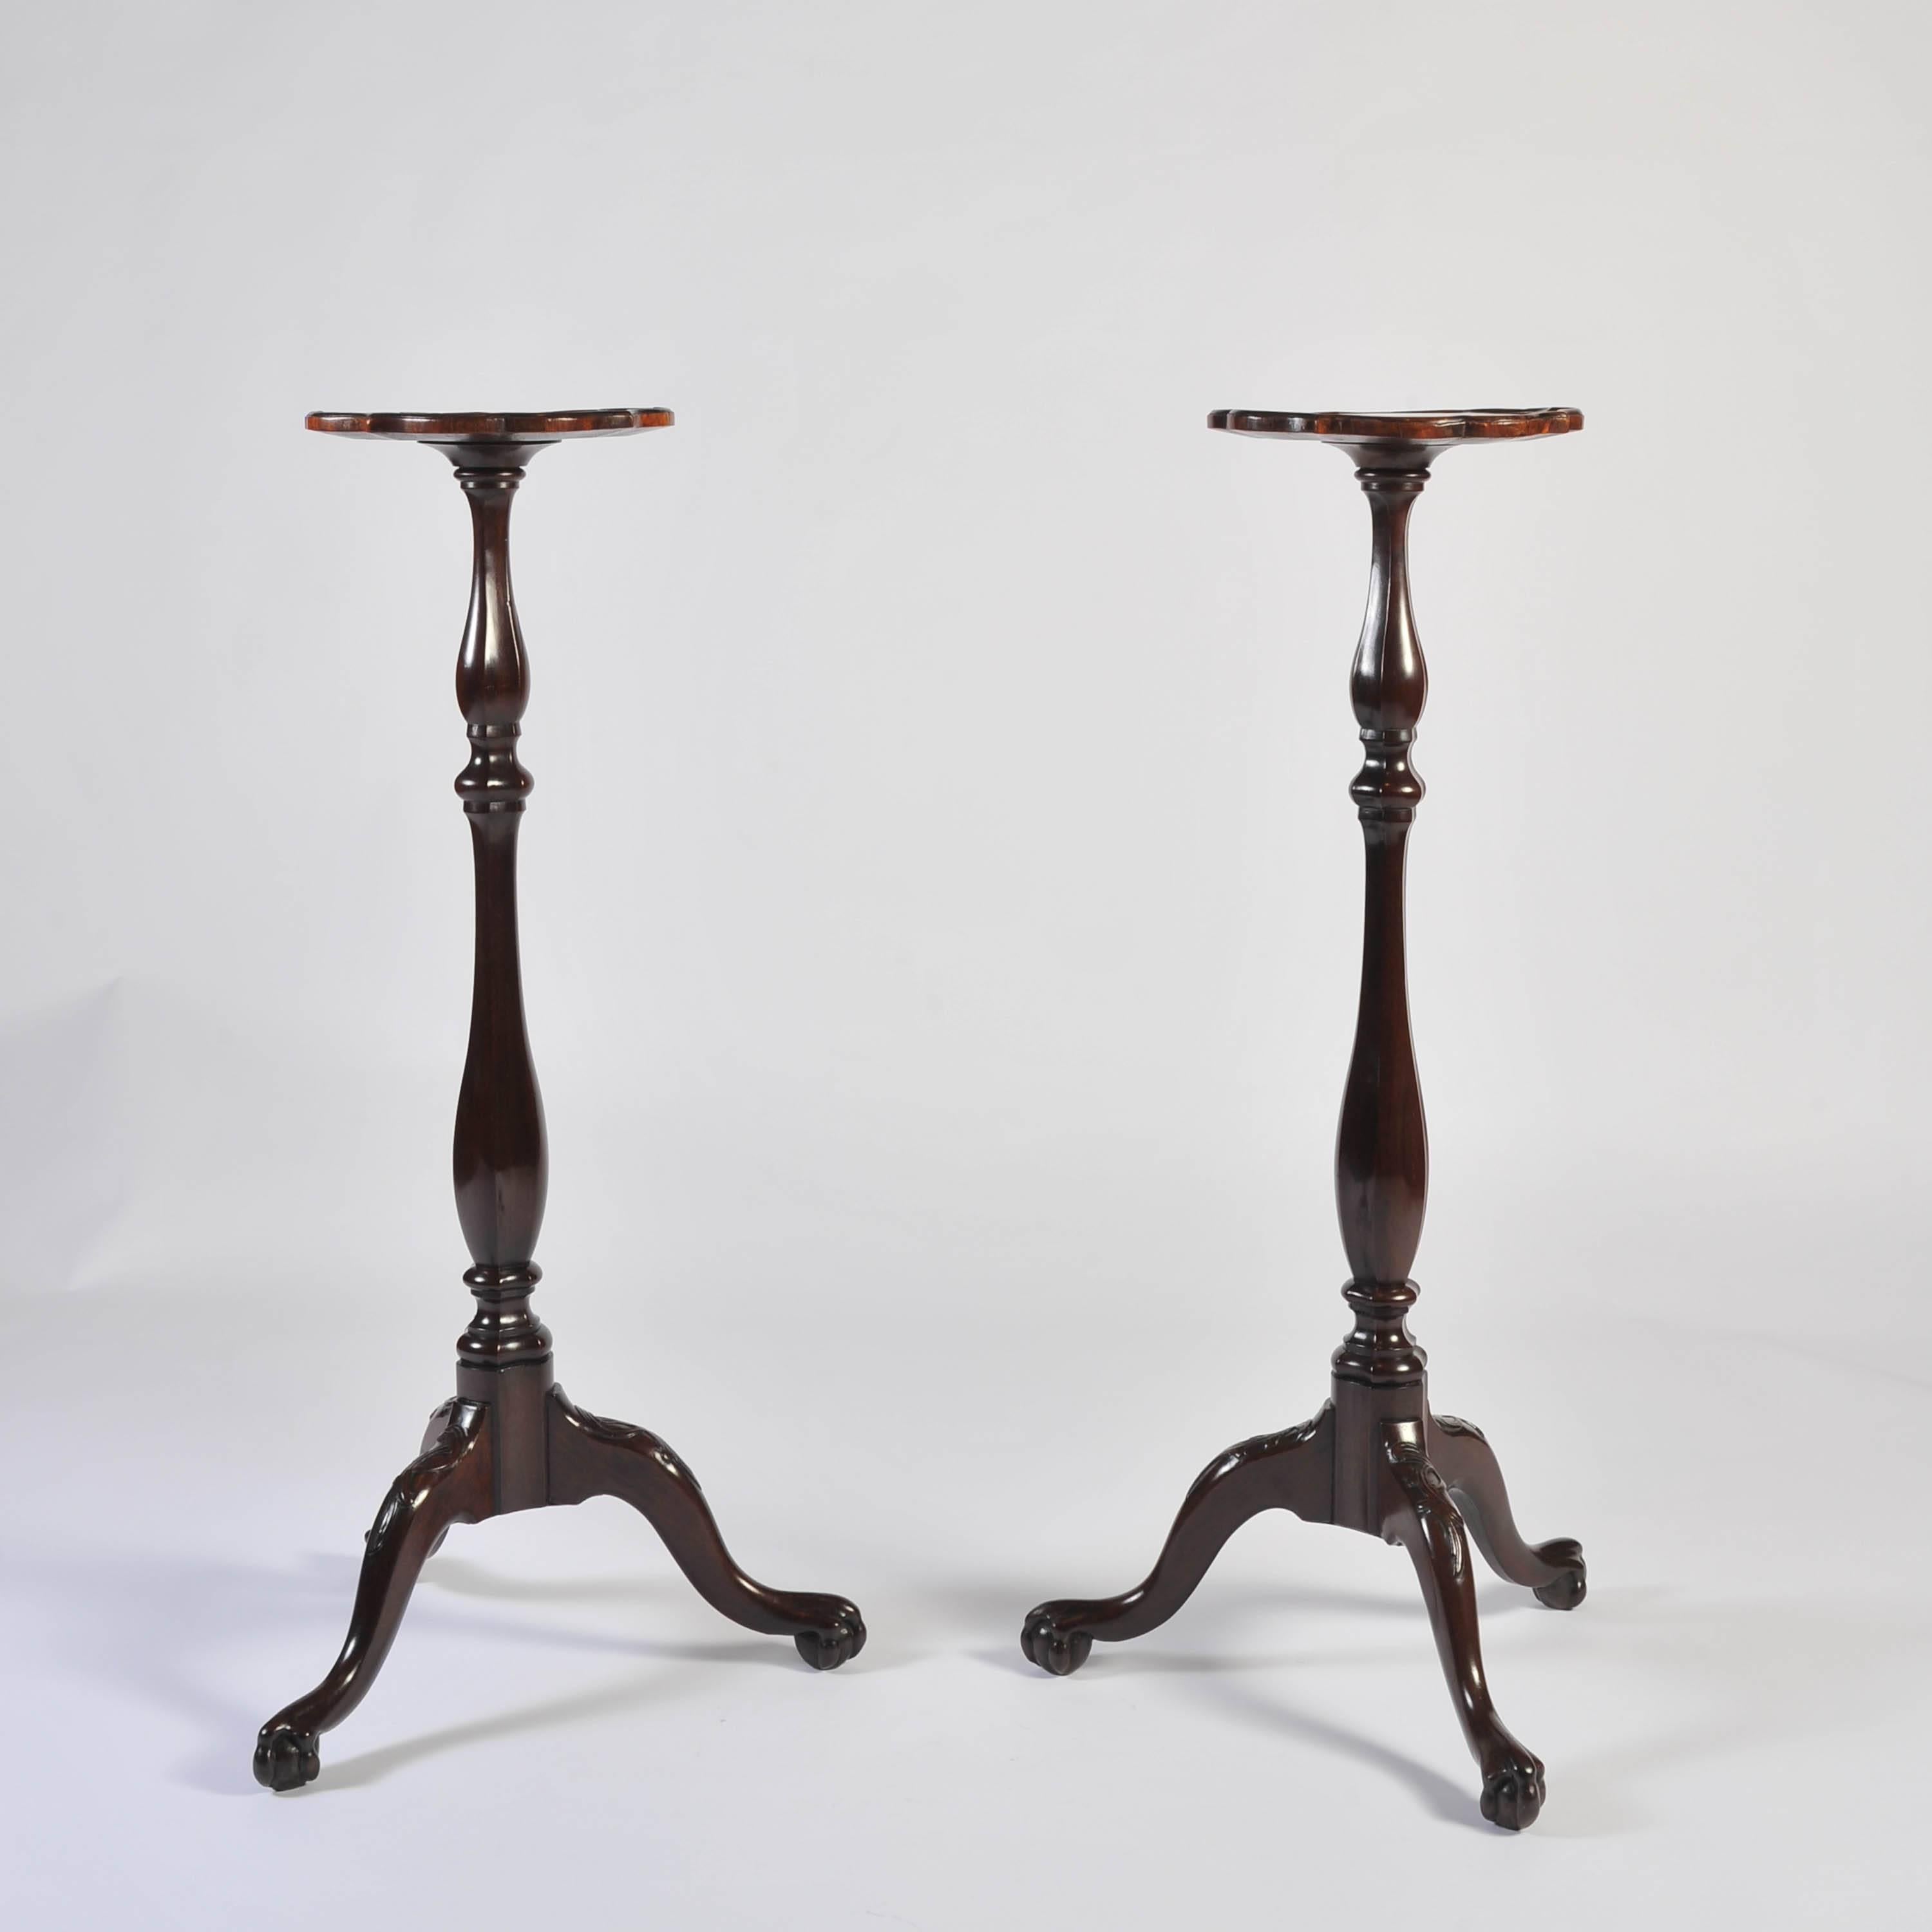 A fine pair of mid-18th century mahogany Dutch torcheres. The quatrefoil tops with moulded edge on double baluster shaped triform stems on a tripod base with cabriole legs carved at the knee, terminating and ball and claw feet. 
Wonderful color and